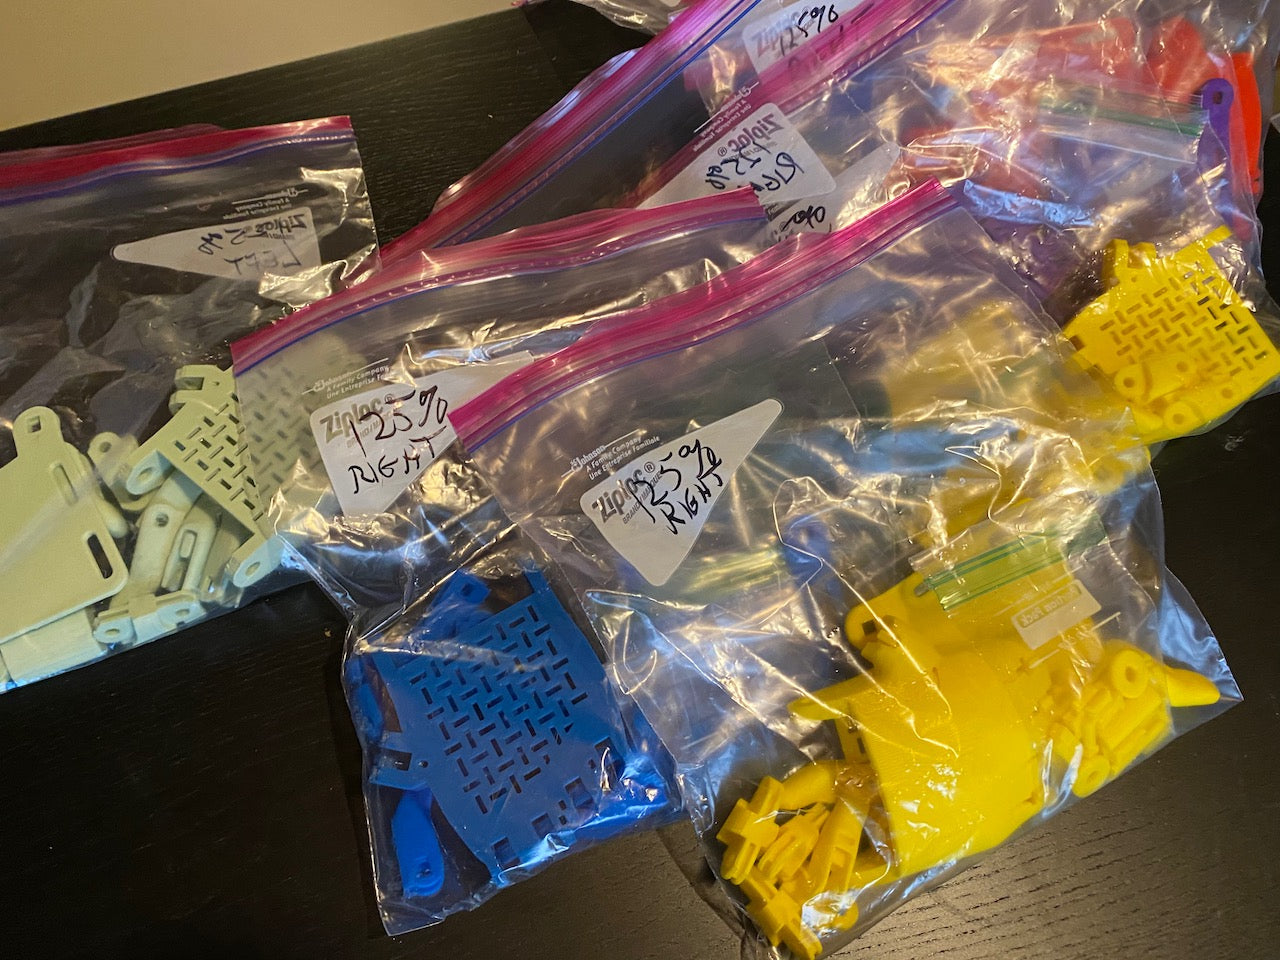 e-NABLE 3D printed hand kits ready to assemble in baggies